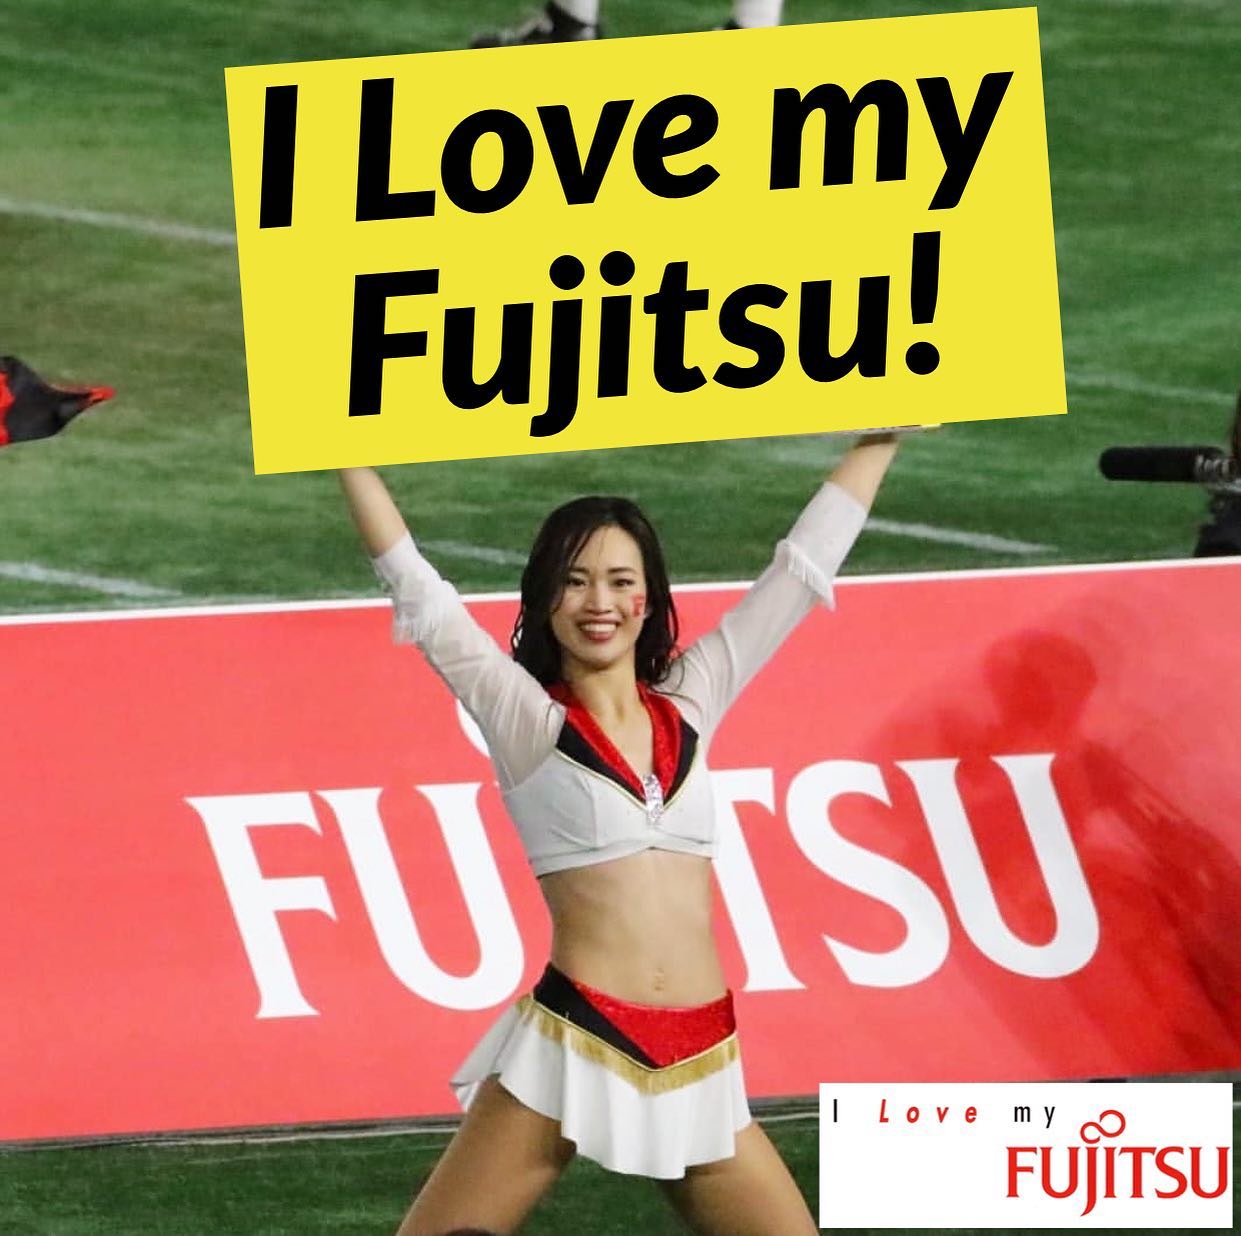 There's a wave of love for Fujitsu air conditioning.  Find a Fujitsu dealer in Hawaii at www.ilovemyfujitsu.com
#oahuhvac #mauihvac #kauaihvac #hawaiihvac #hawaiihvaccontractor #hawaiihvacsuperstore #hvac #hvactechnician #hvaclife #hvacowner #hvacpro #hvacquality #hvactech #hvacdesign #hvacinstall #hvaccontractor #hvacinstallation #airconditioninginstallation #airconditioningcontractor #airconditioner #facilitymanagement #propertymanagement #sports #football